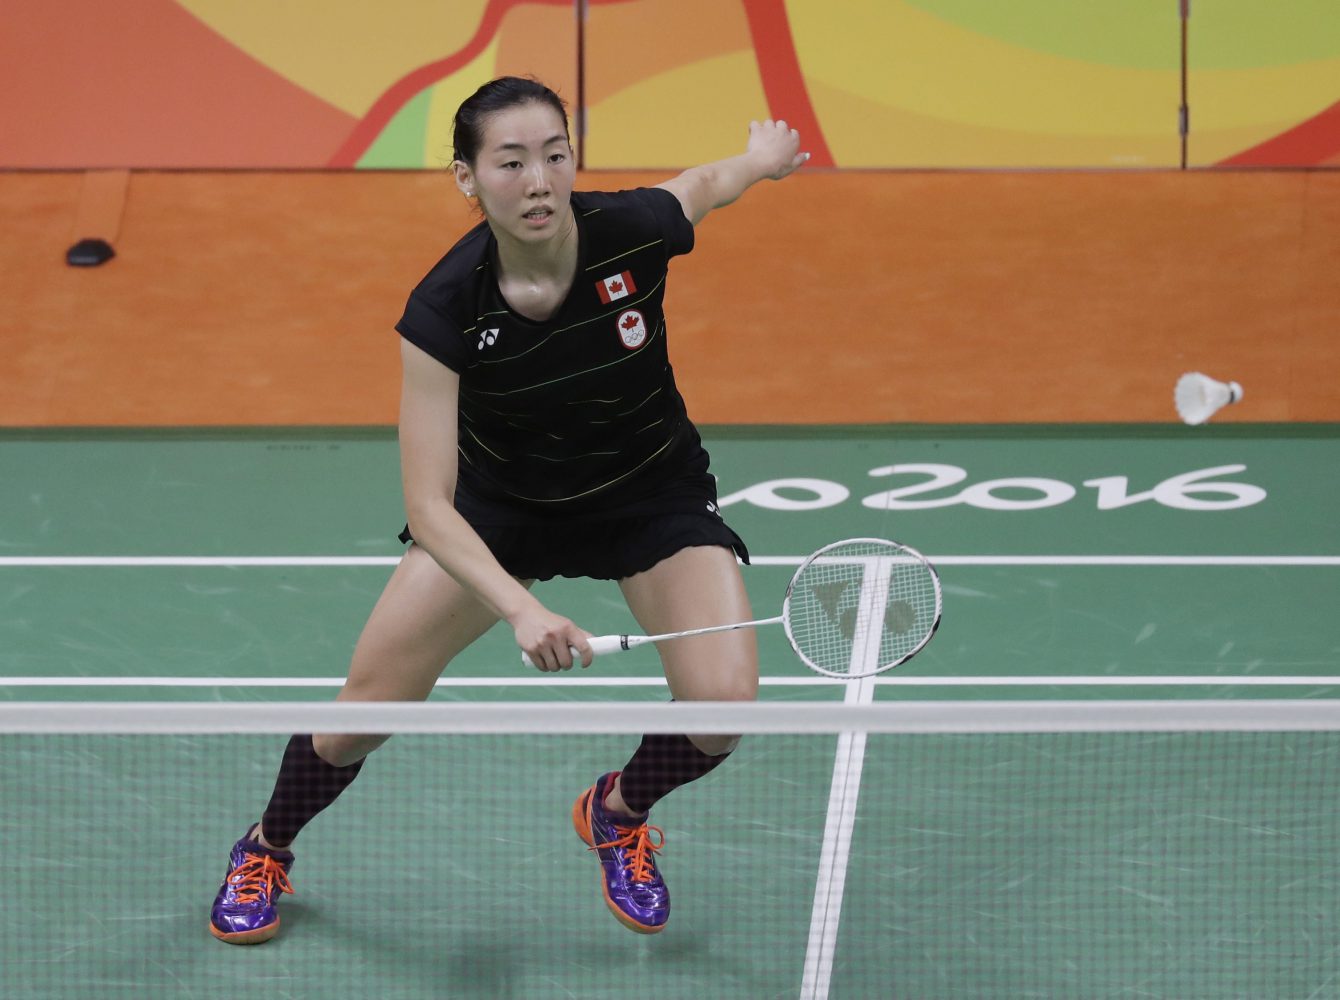 Canada's Michelle Li returns a shot to Hungary's Laura Sarosi during a Women's single match at the 2016 Summer Olympics in Rio de Janeiro, Brazil, Saturday, Aug. 13, 2016. (AP Photo/Kin Cheung)